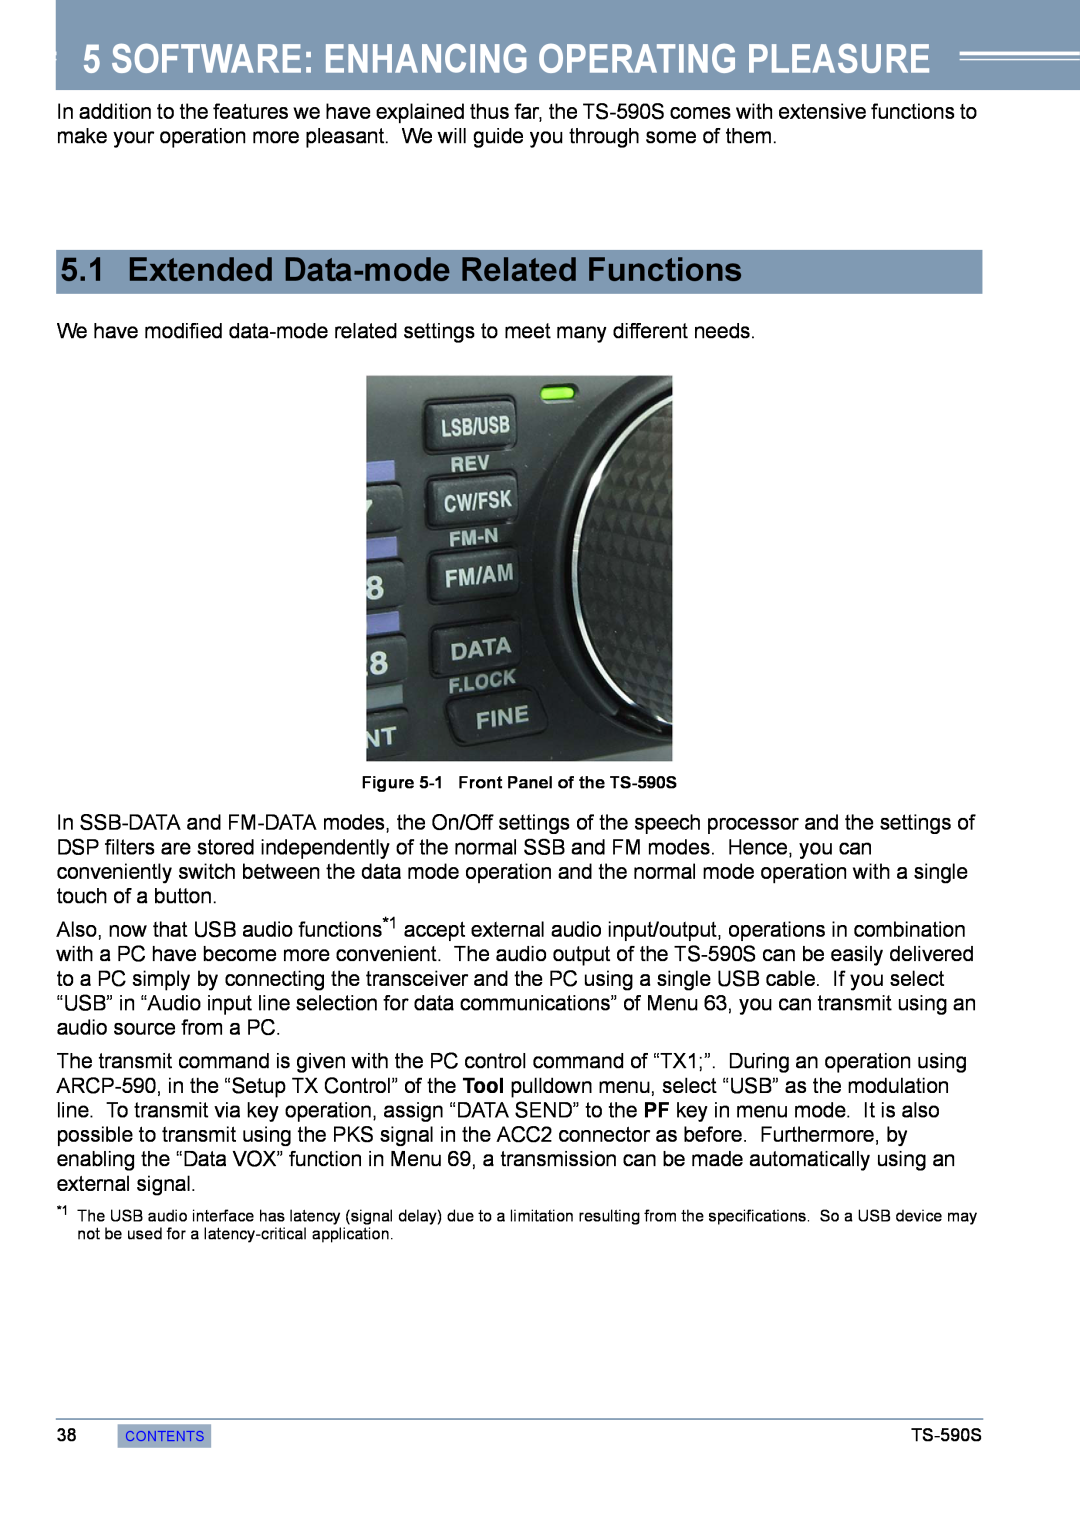 Kenwood TS-590S manual Software: Enhancing Operating Pleasure, Extended Data-modeRelated Functions 